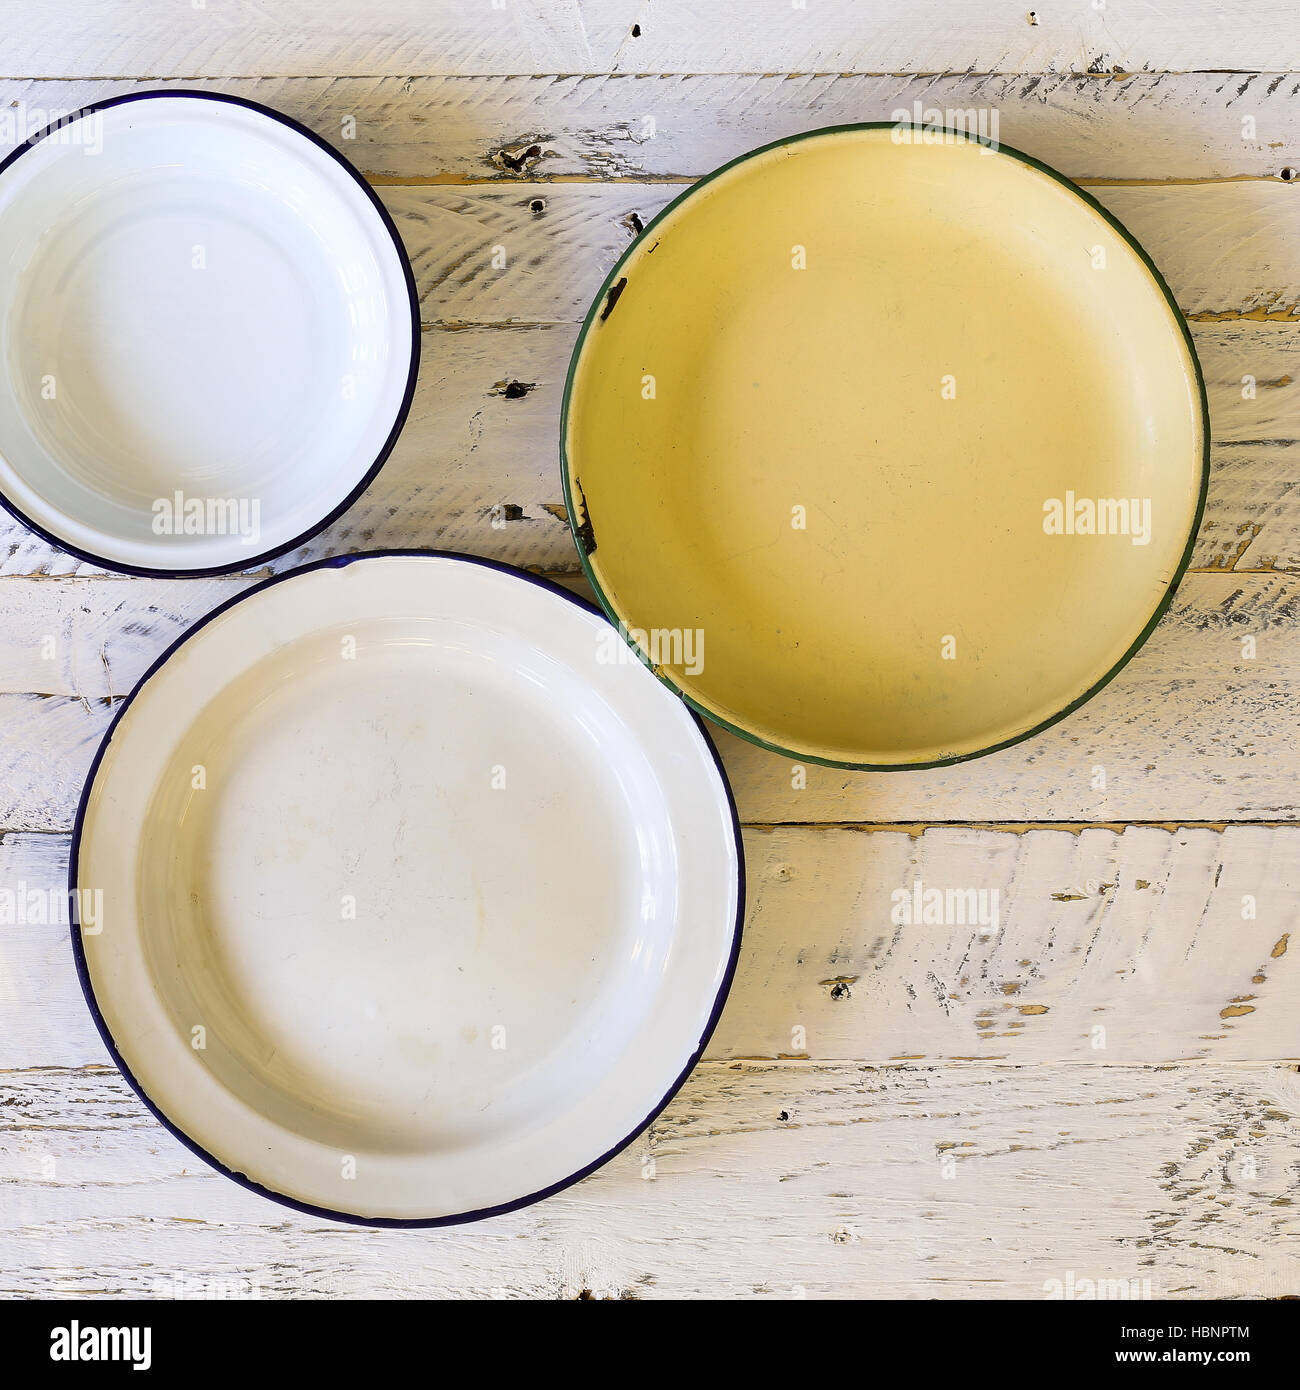 Set of plates with vintage shape border pattern assorted ceramic china on white painted rough wood background Stock Photo